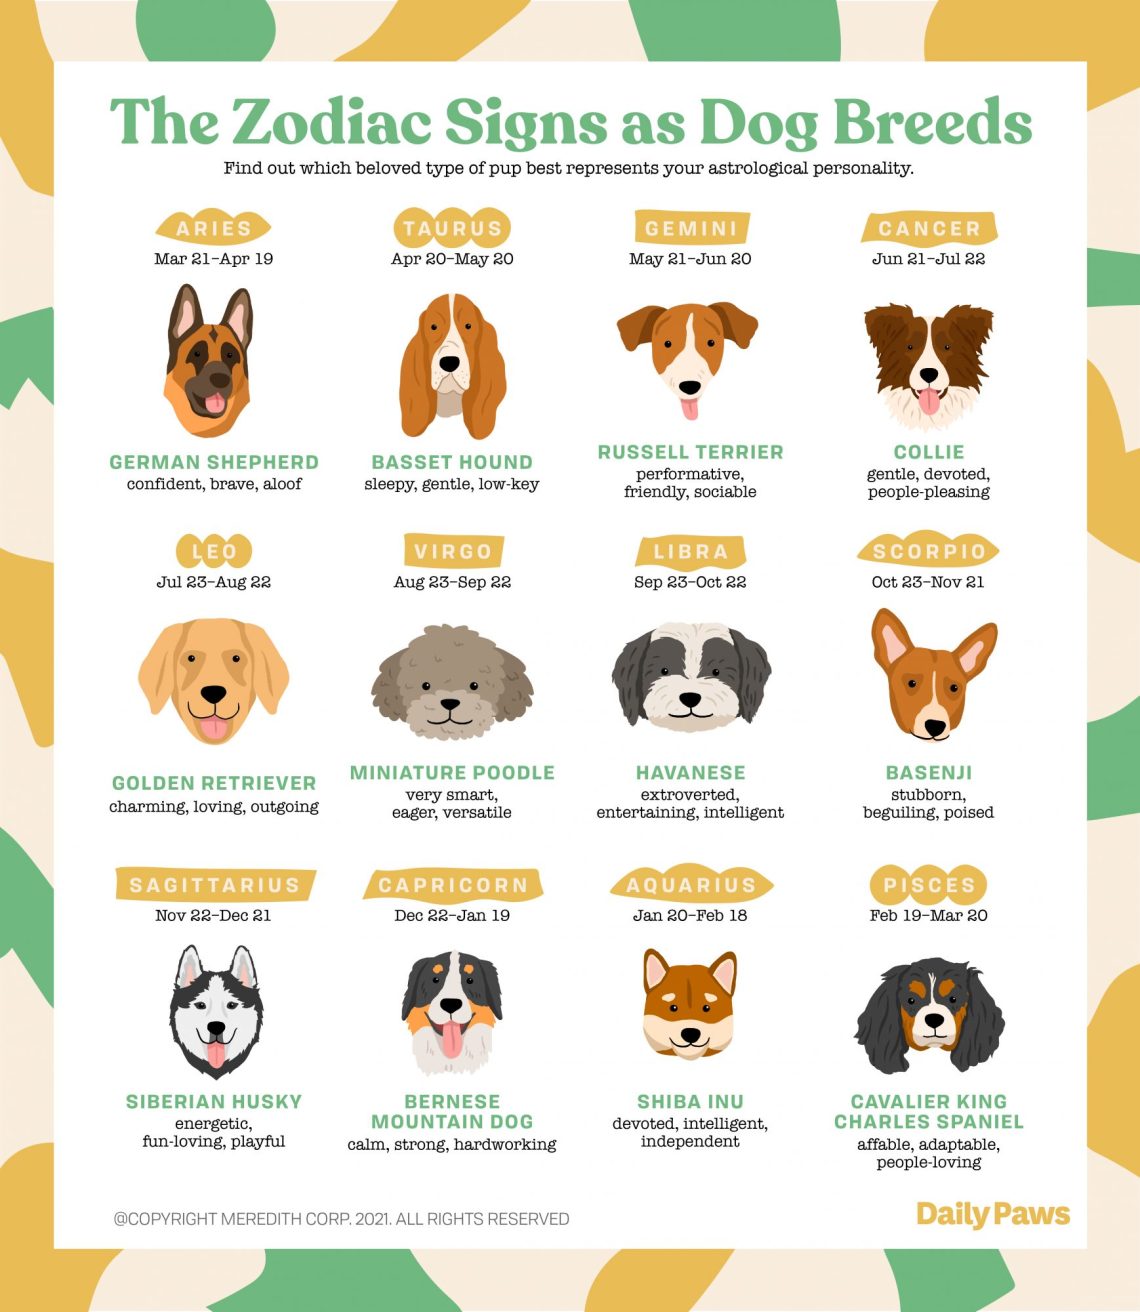 What kind of dog are you according to your zodiac sign?